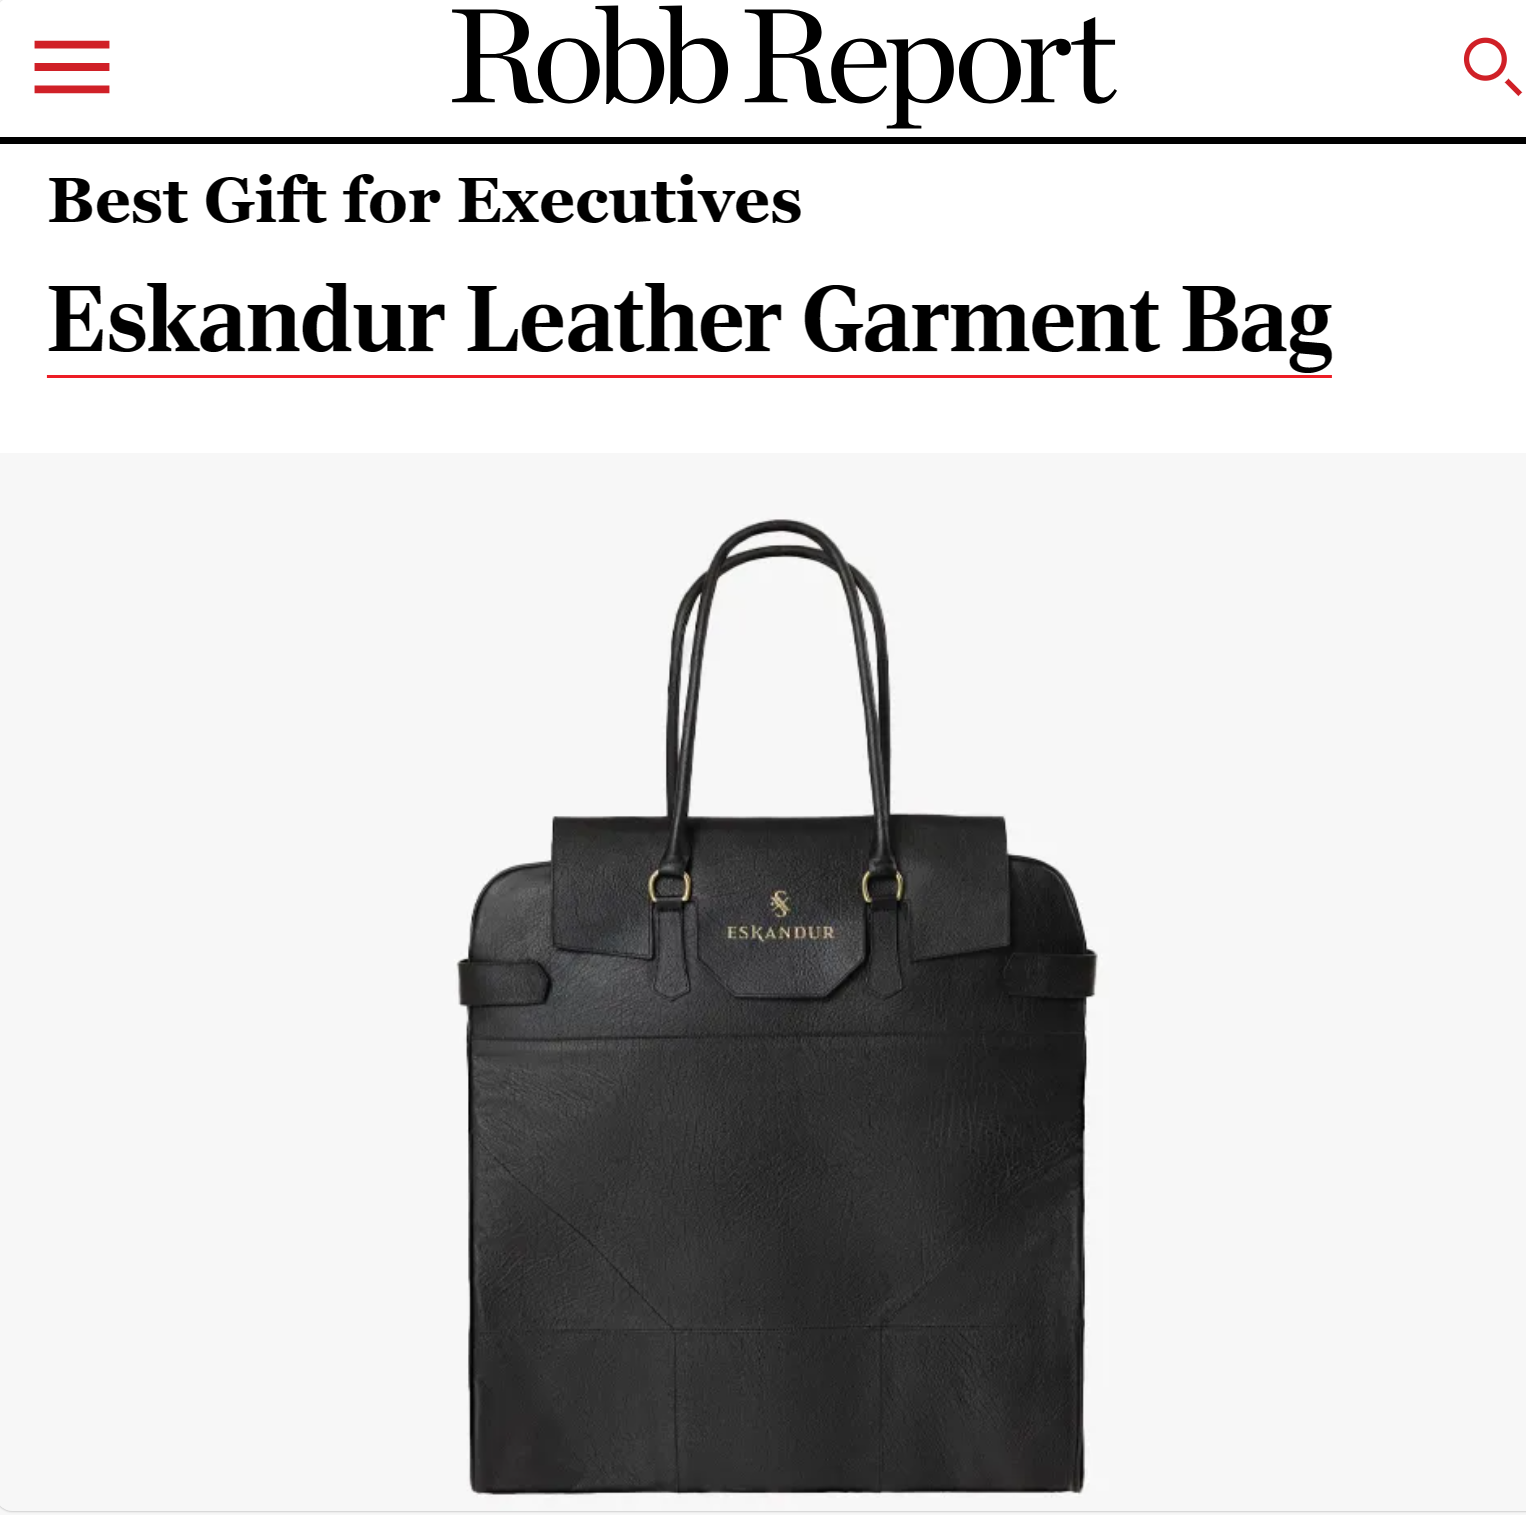 Eskandur's Luxury Leather Garment Bag Wins "Best Gift for Executives" Award by Robb Report